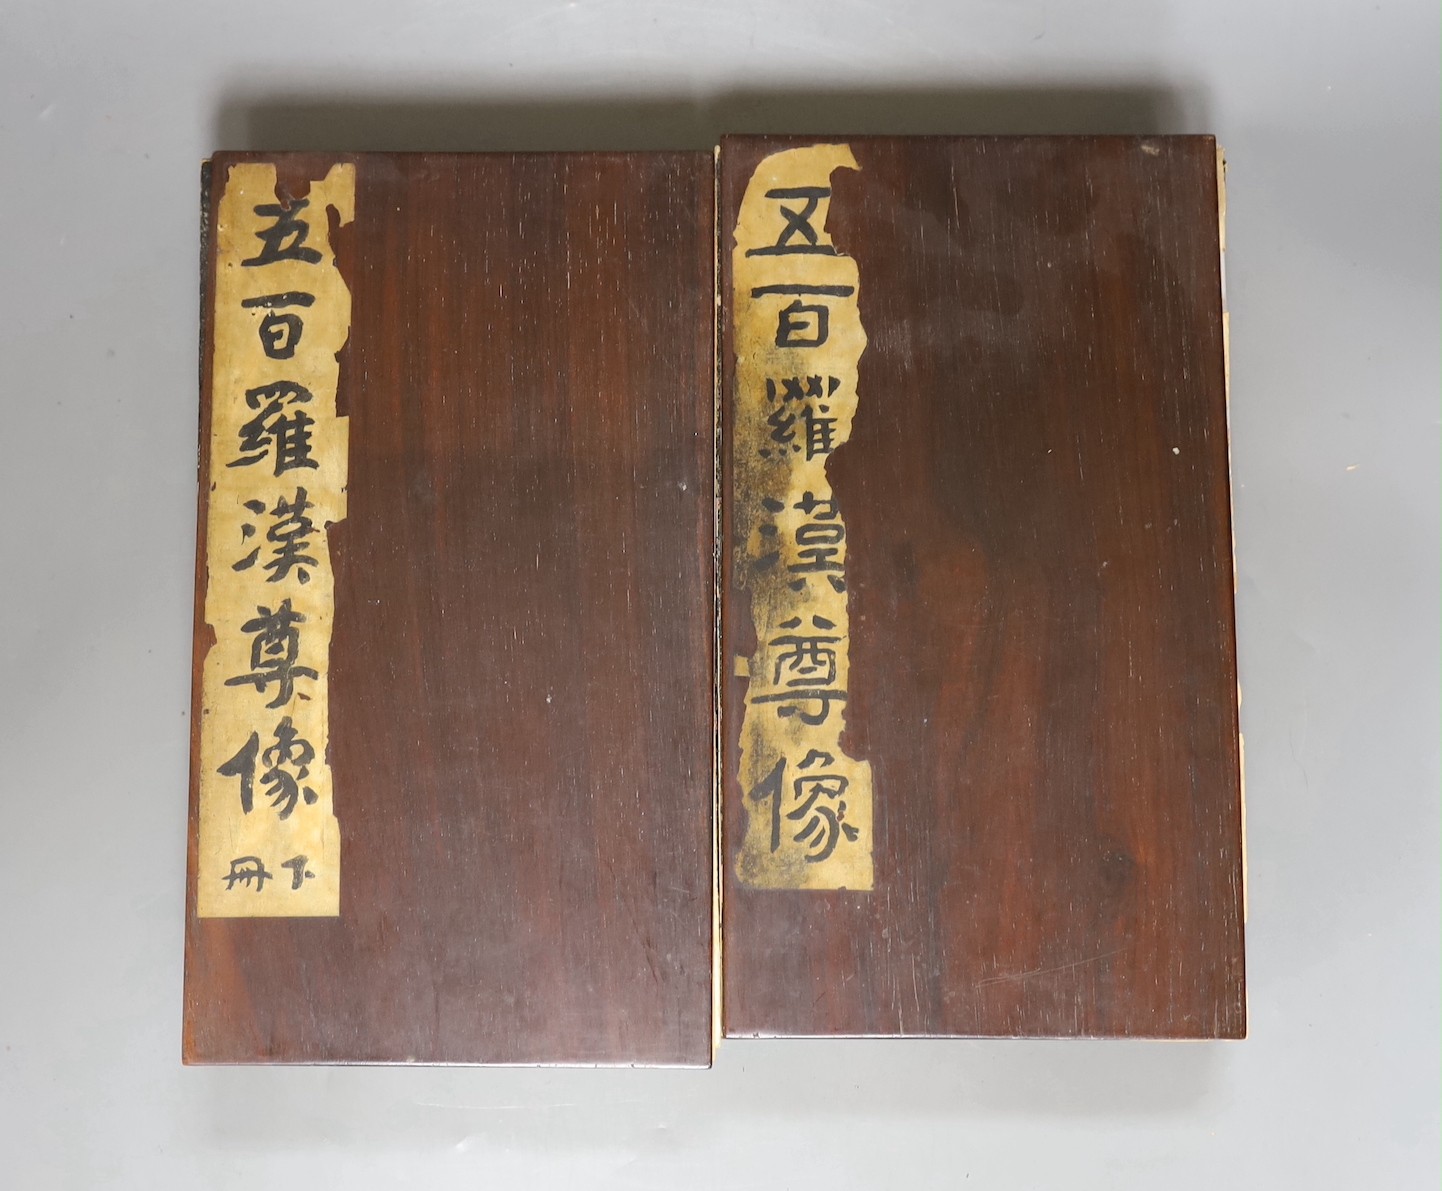 Two Chinese illustrated books Five Hundred Luohan, late Qing dynasty, hongmu covers (detached)